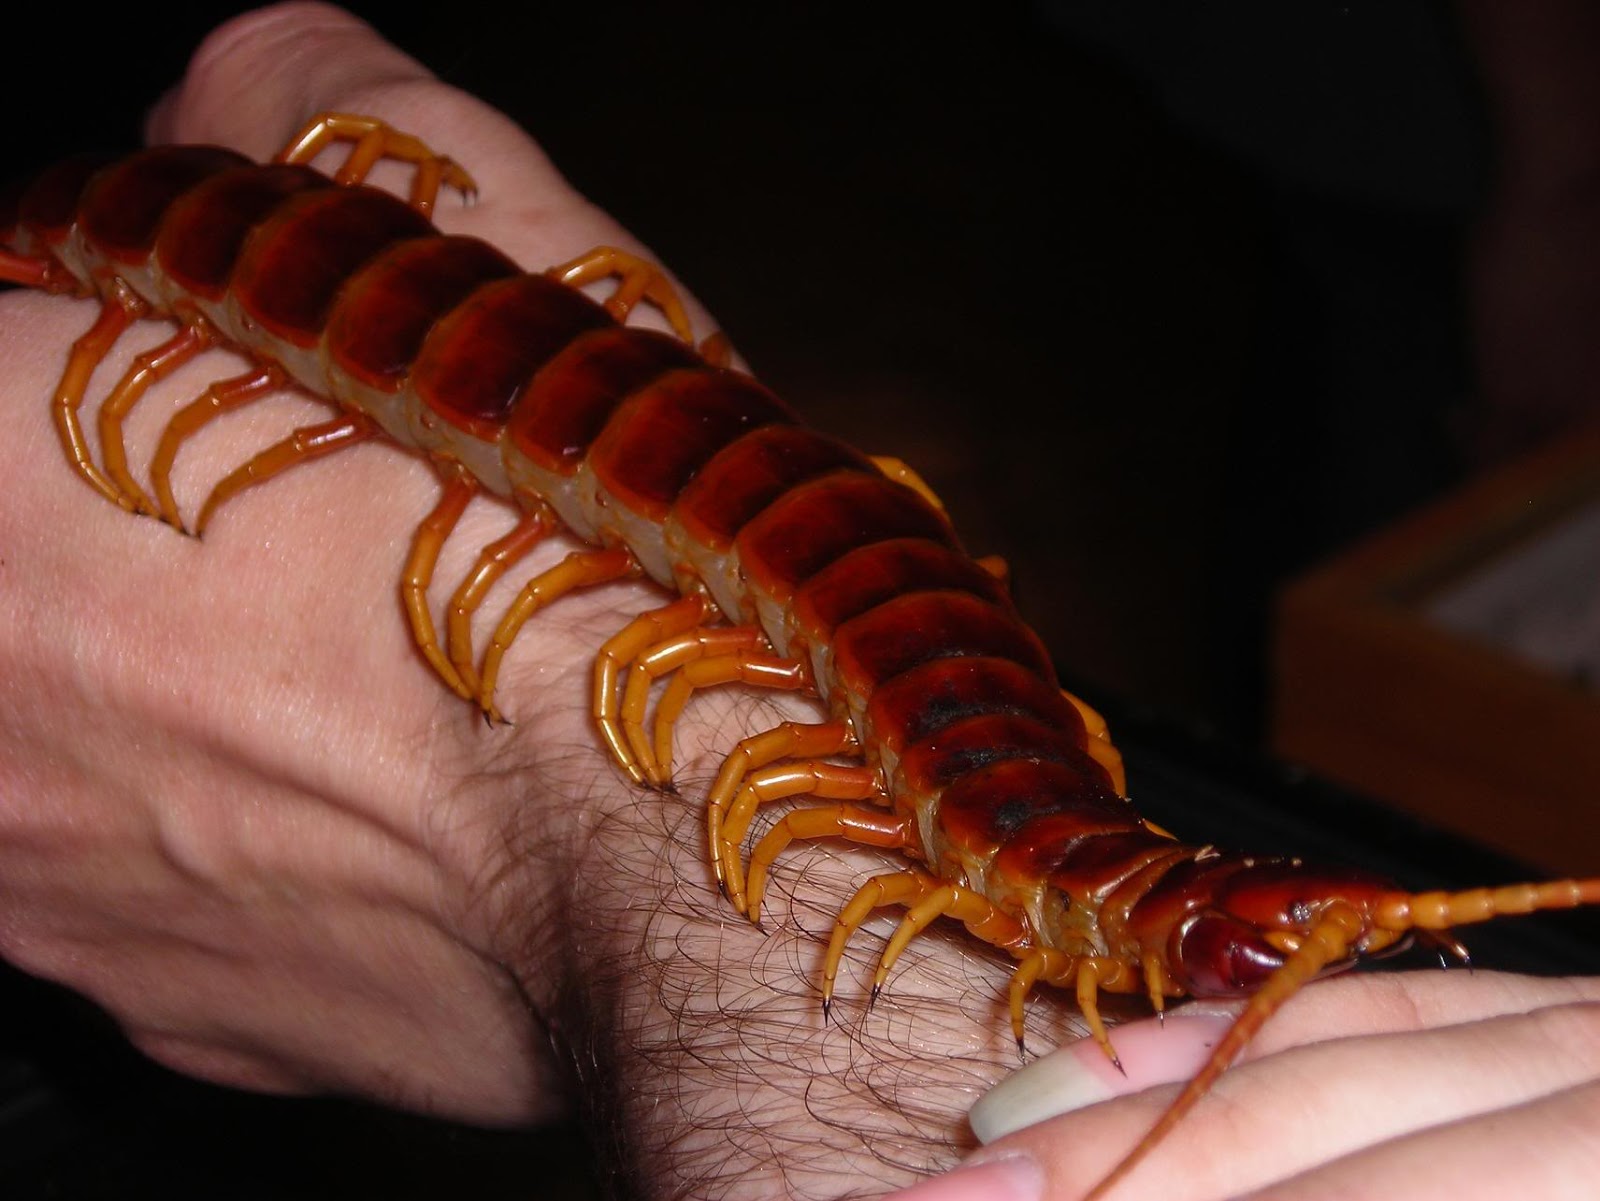 Giant Centipedes wallpapers.